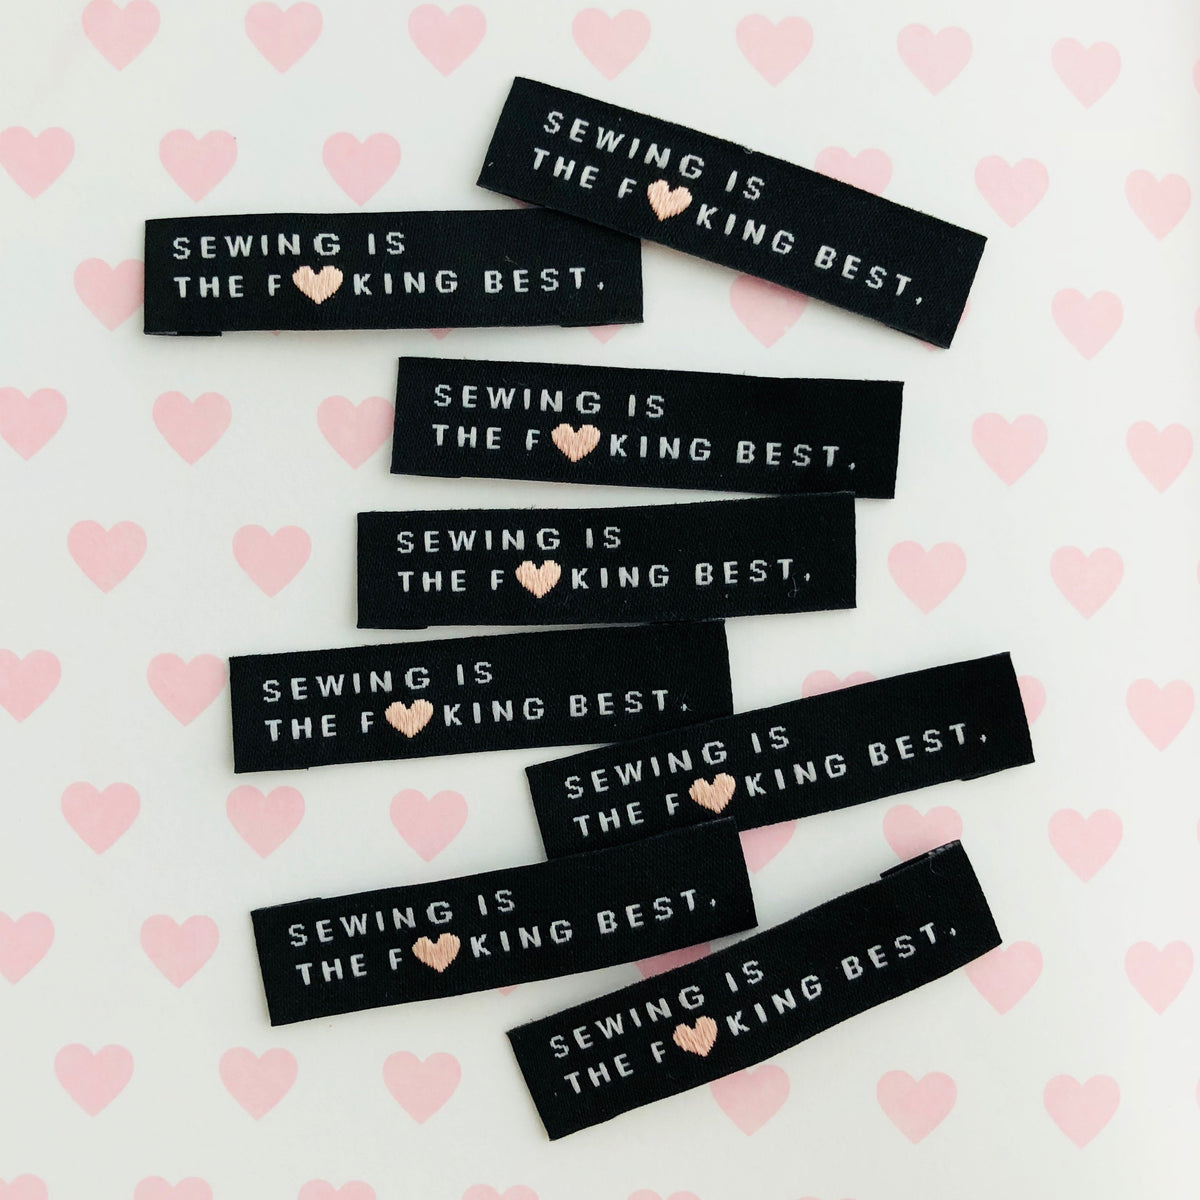 SEWING IS THE F*CKING BEST by KATM - Pack of 8 Woven Labels